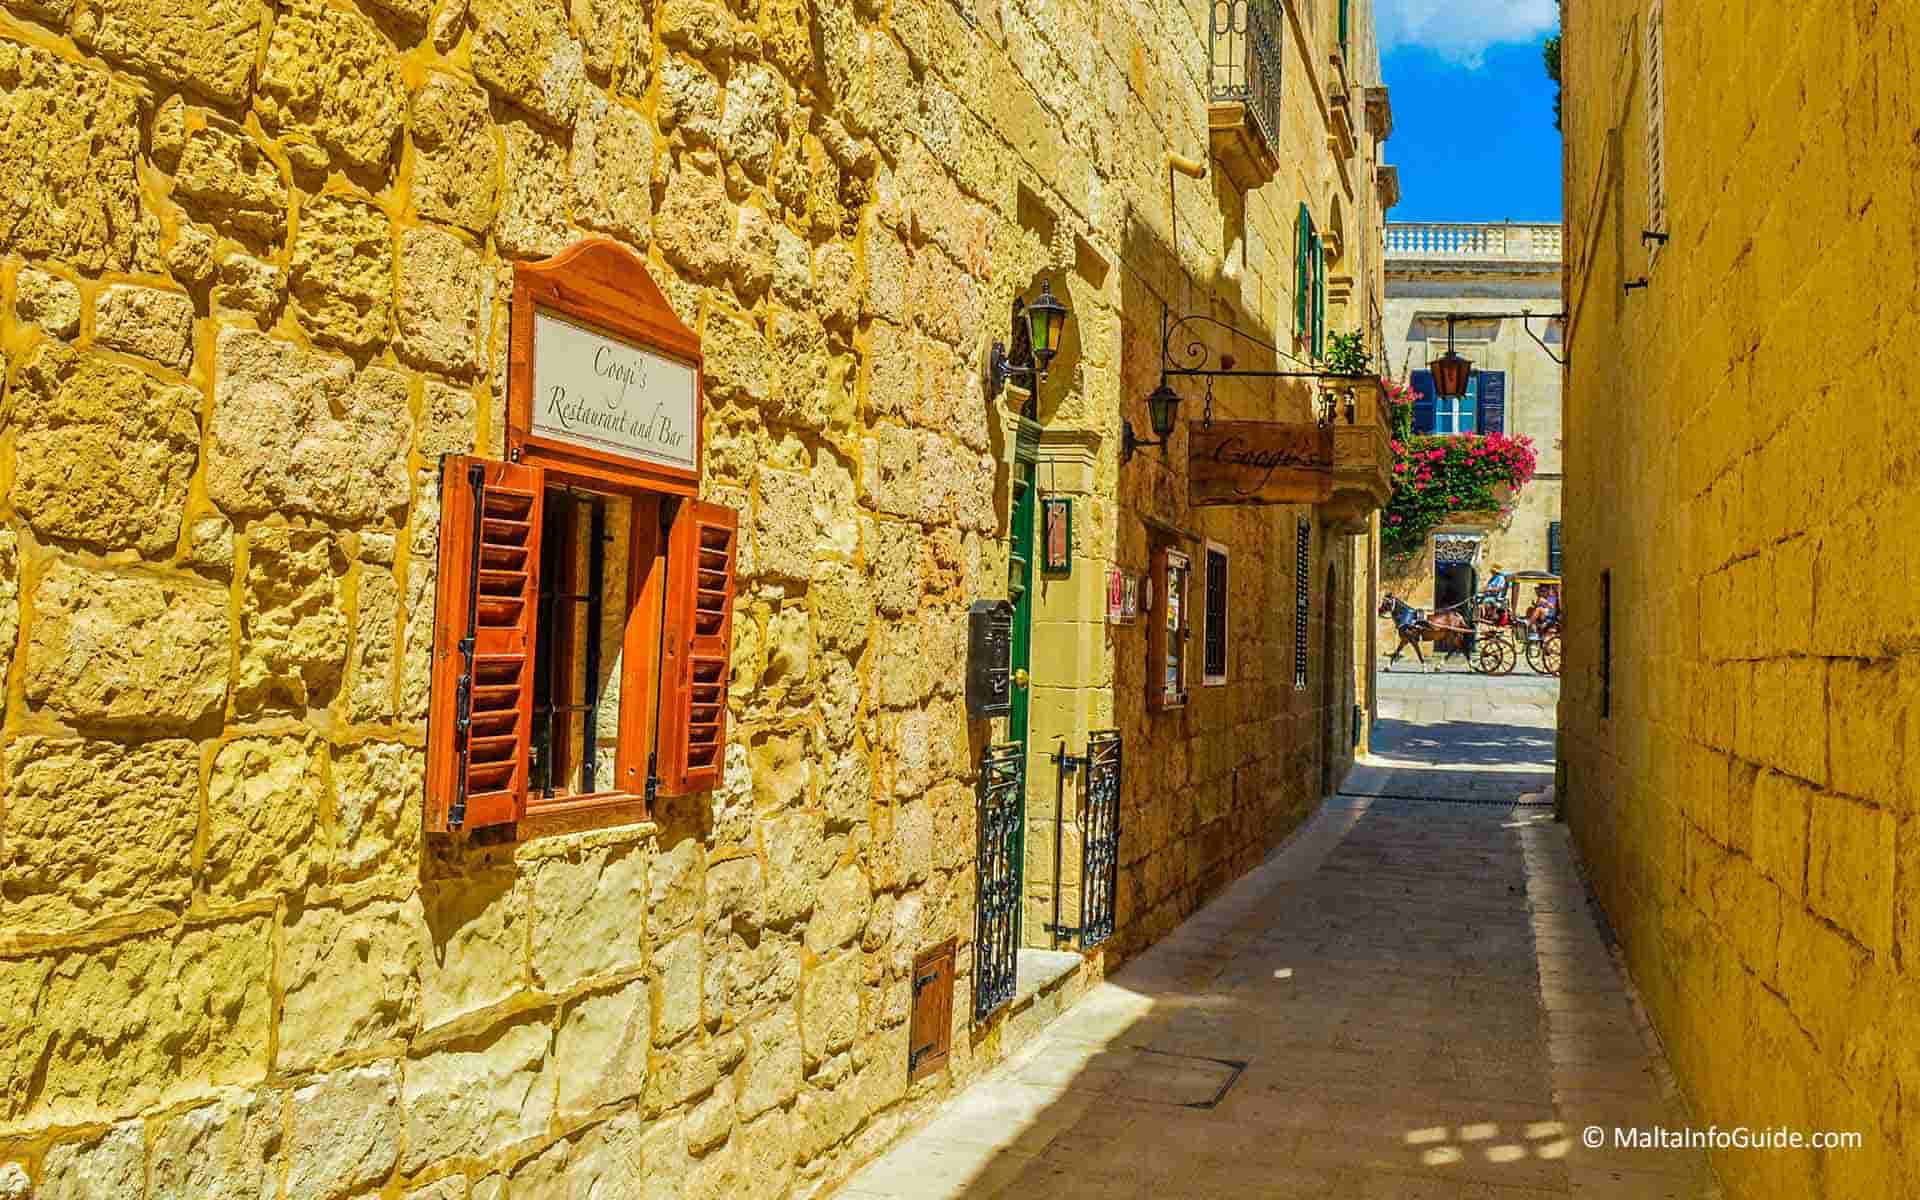 A beautiful narrow street. A horse-drawn carriage can be seen passing through the street of Mdina.